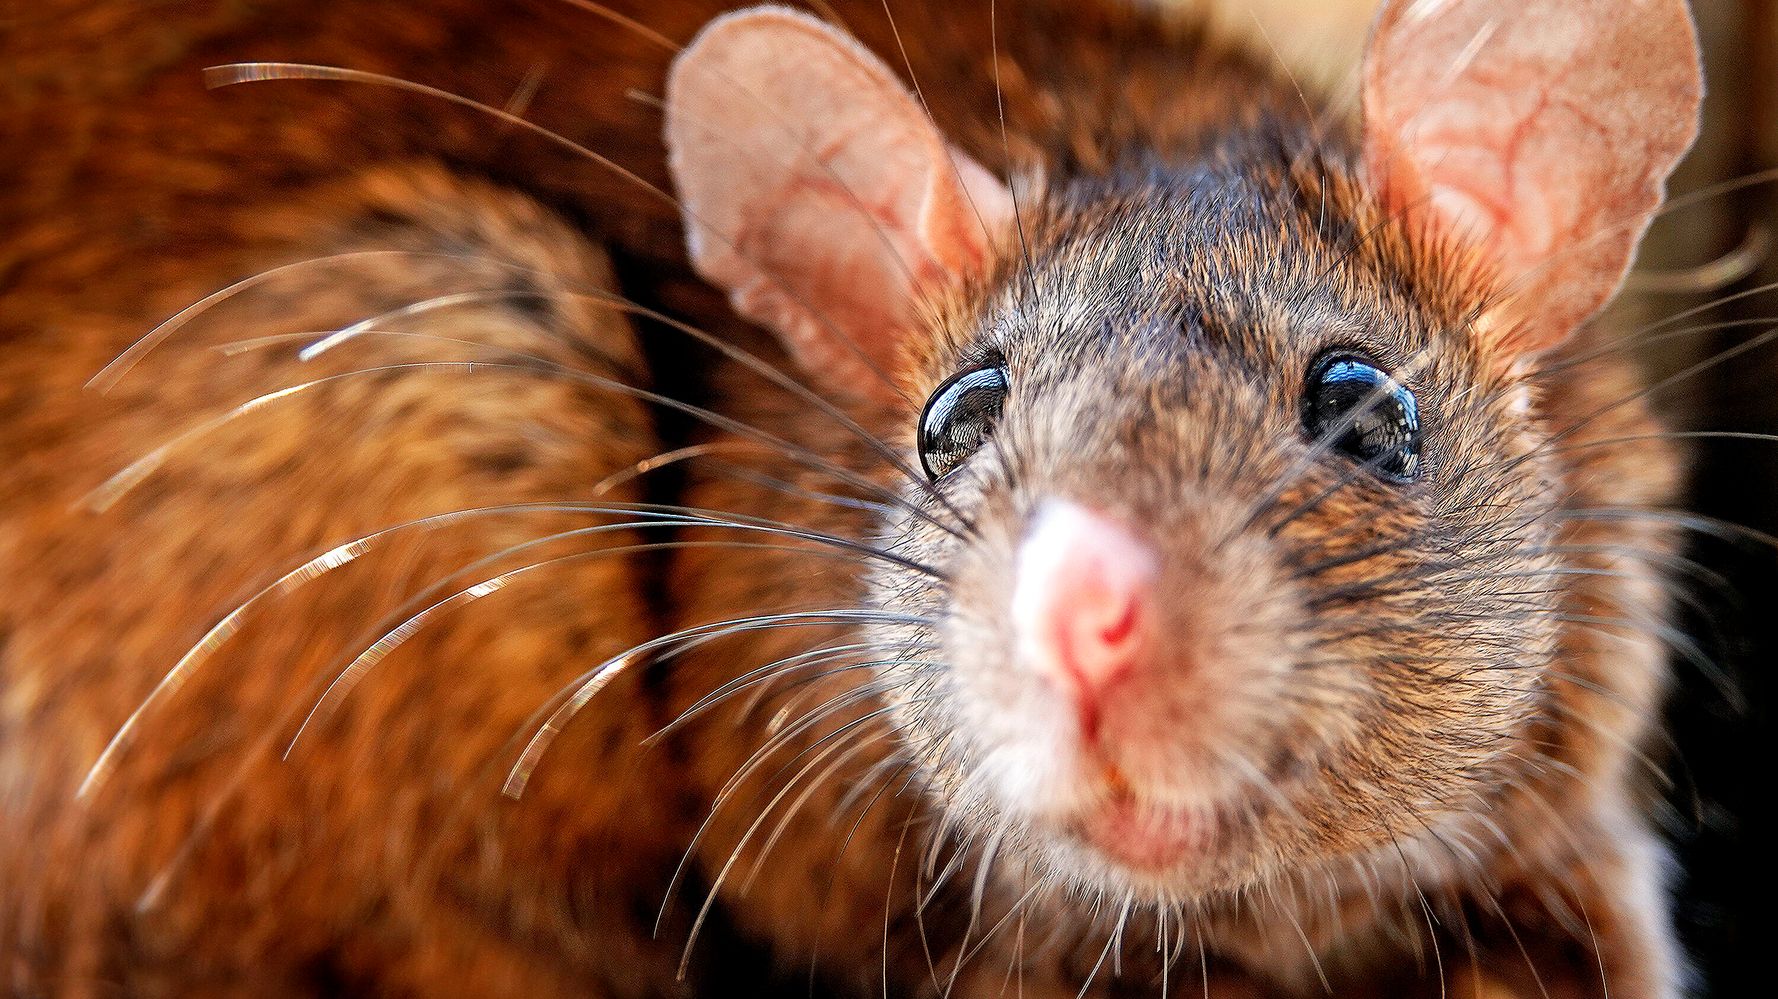 Australia’s massive mouse plague footage will haunt your nightmares